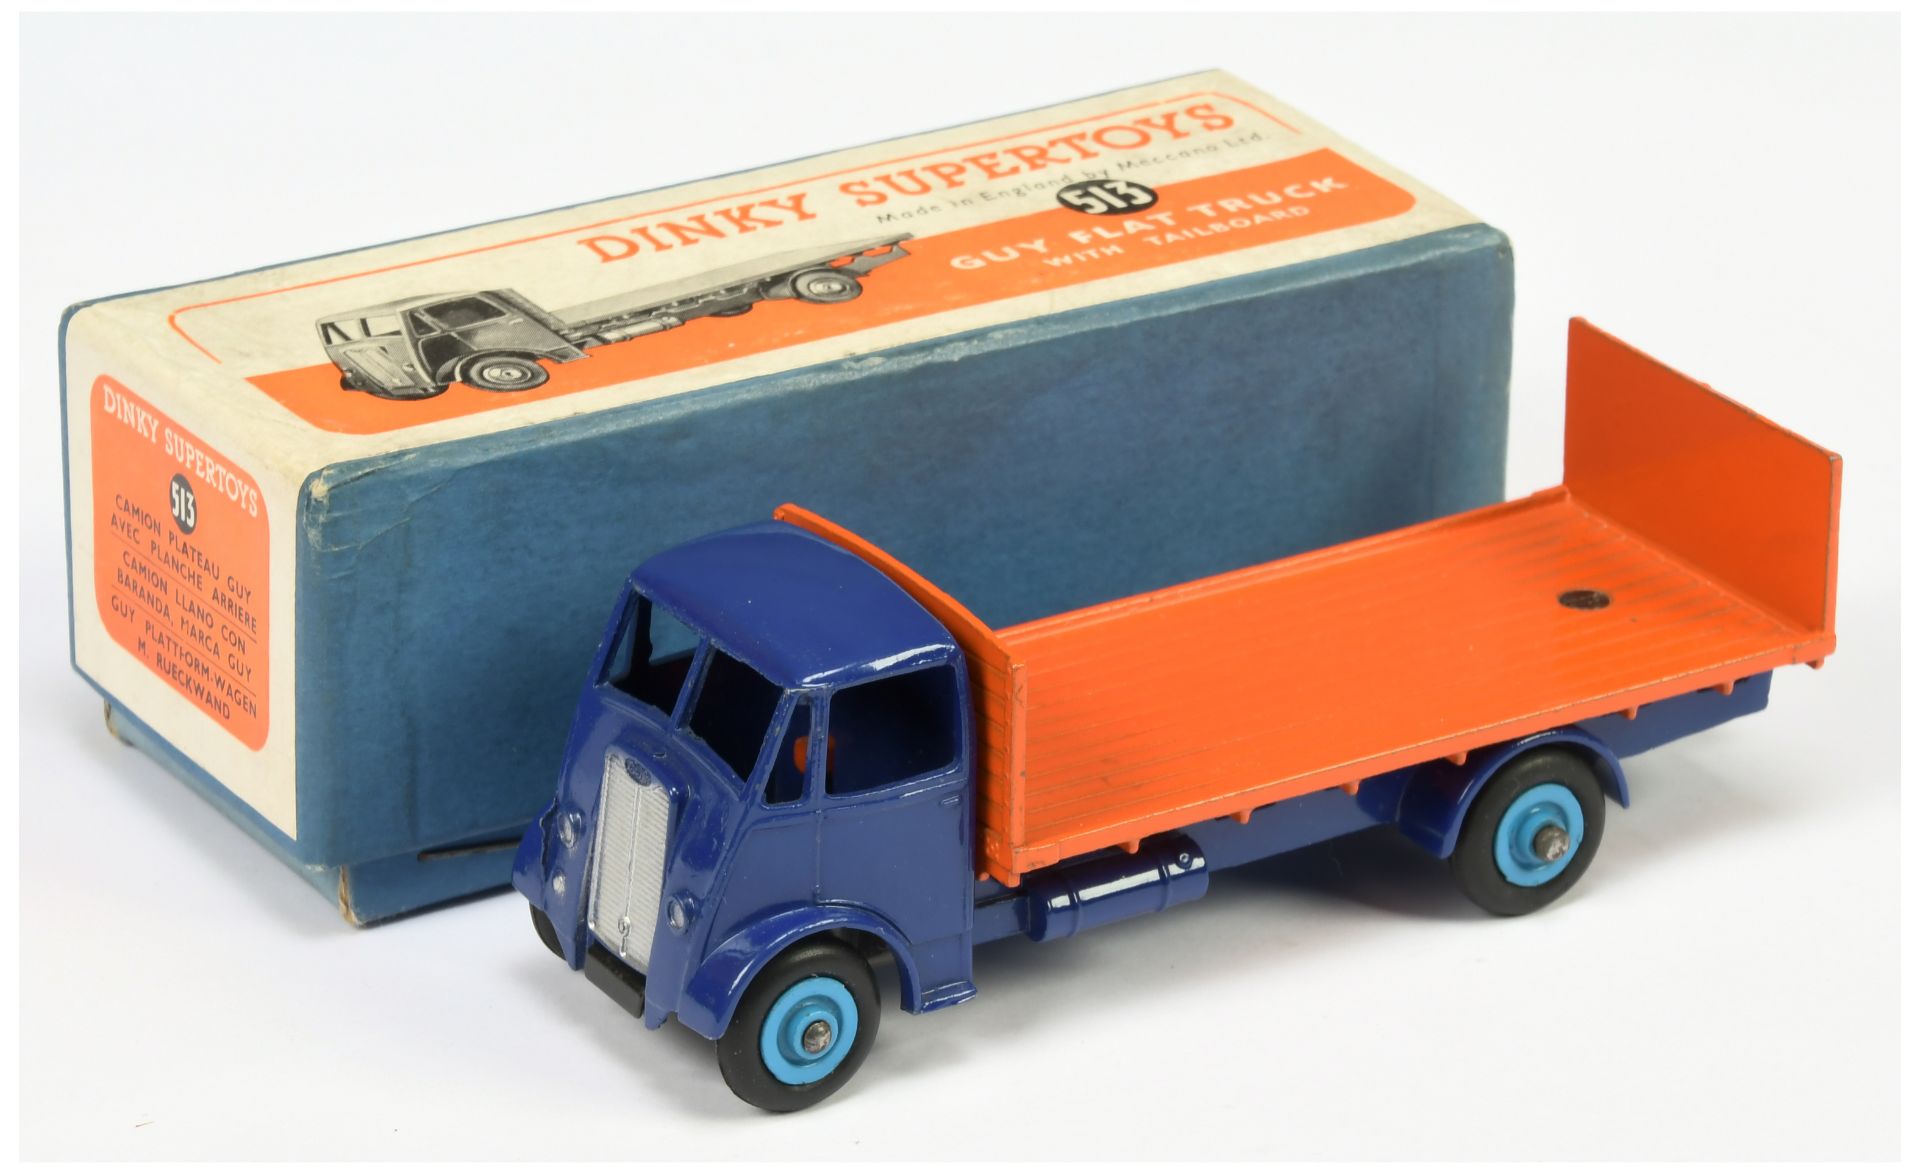 Dinky toys 513 Guy (type 2) Flat Truck with Tailboard - Blue cab and chassis, orange back, mid-bl...